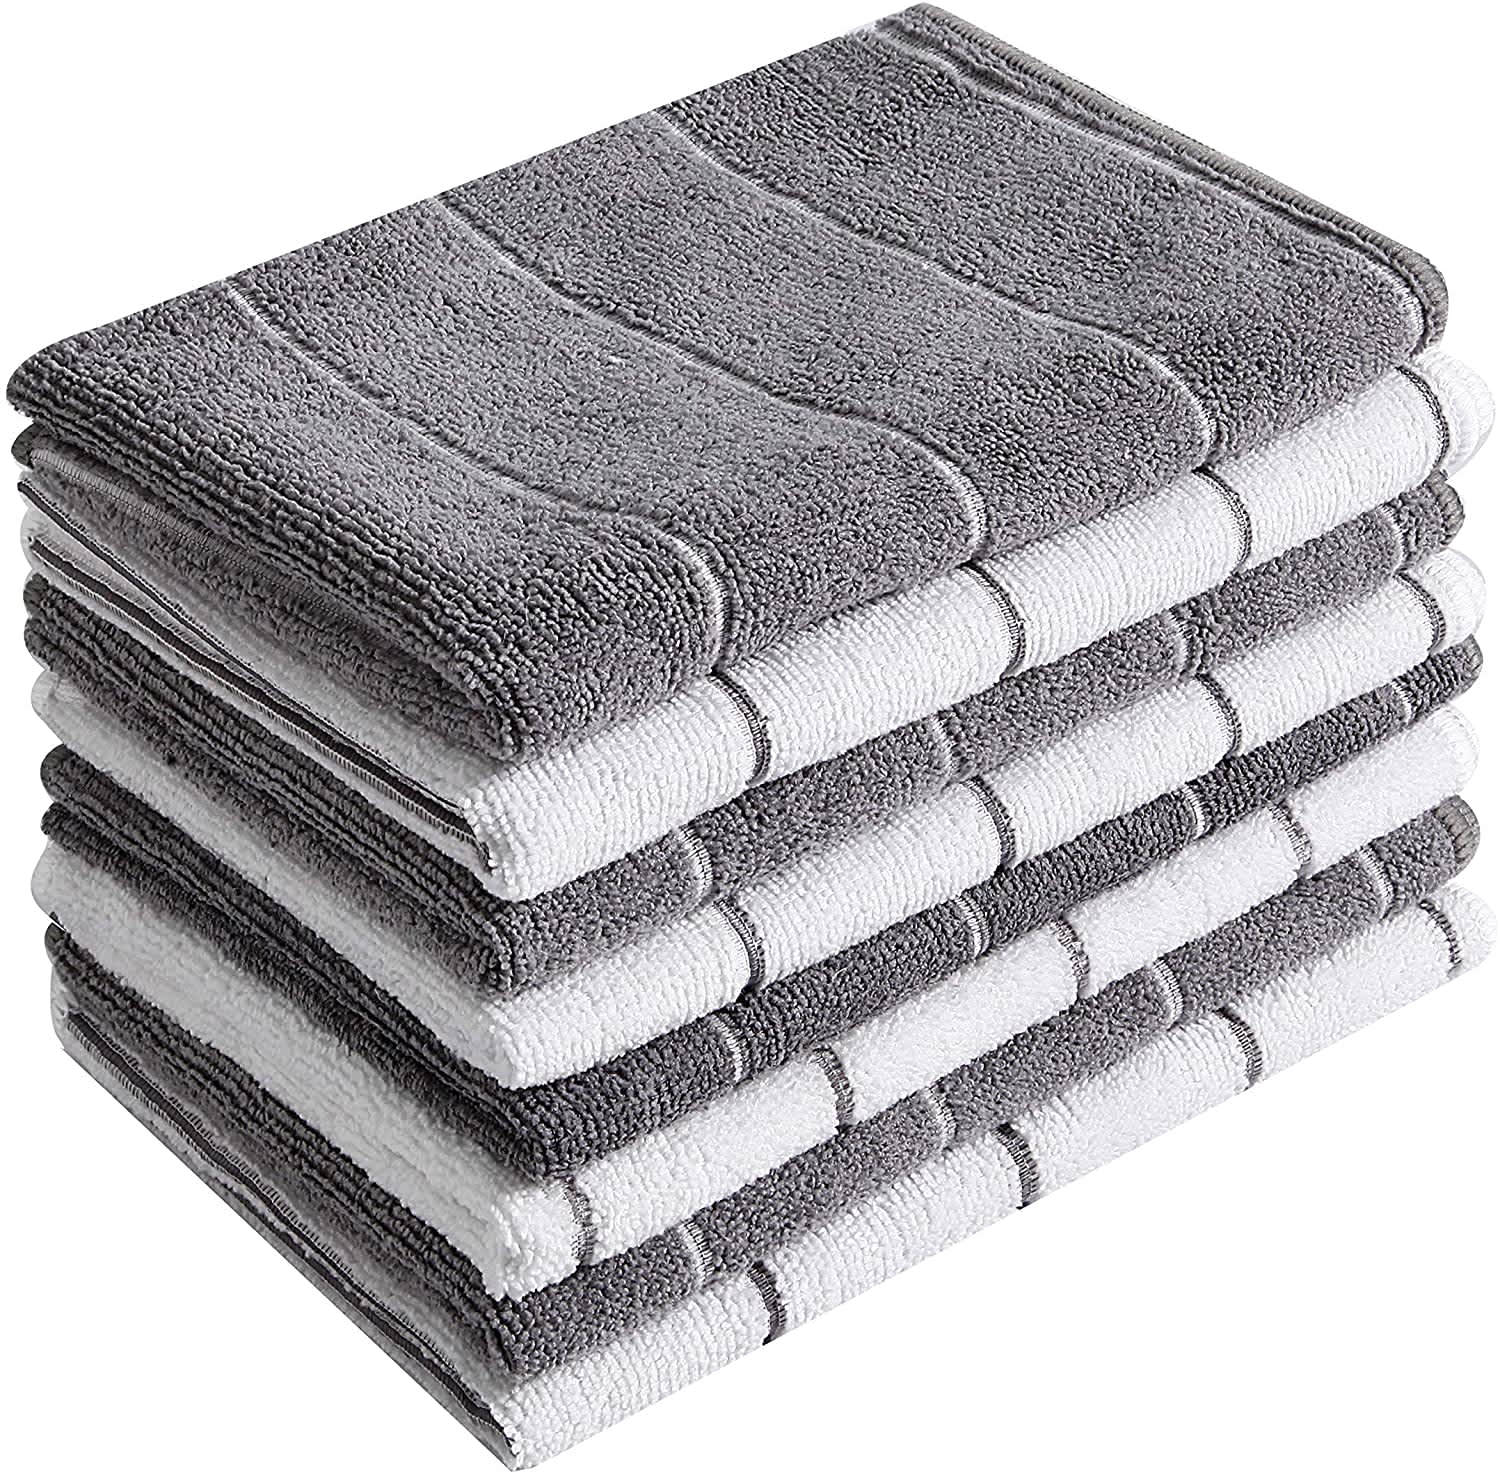 EasyTheory Free of Odor, Stain And Grease, Thick Absorbent Wood Fiber Dish  Towel